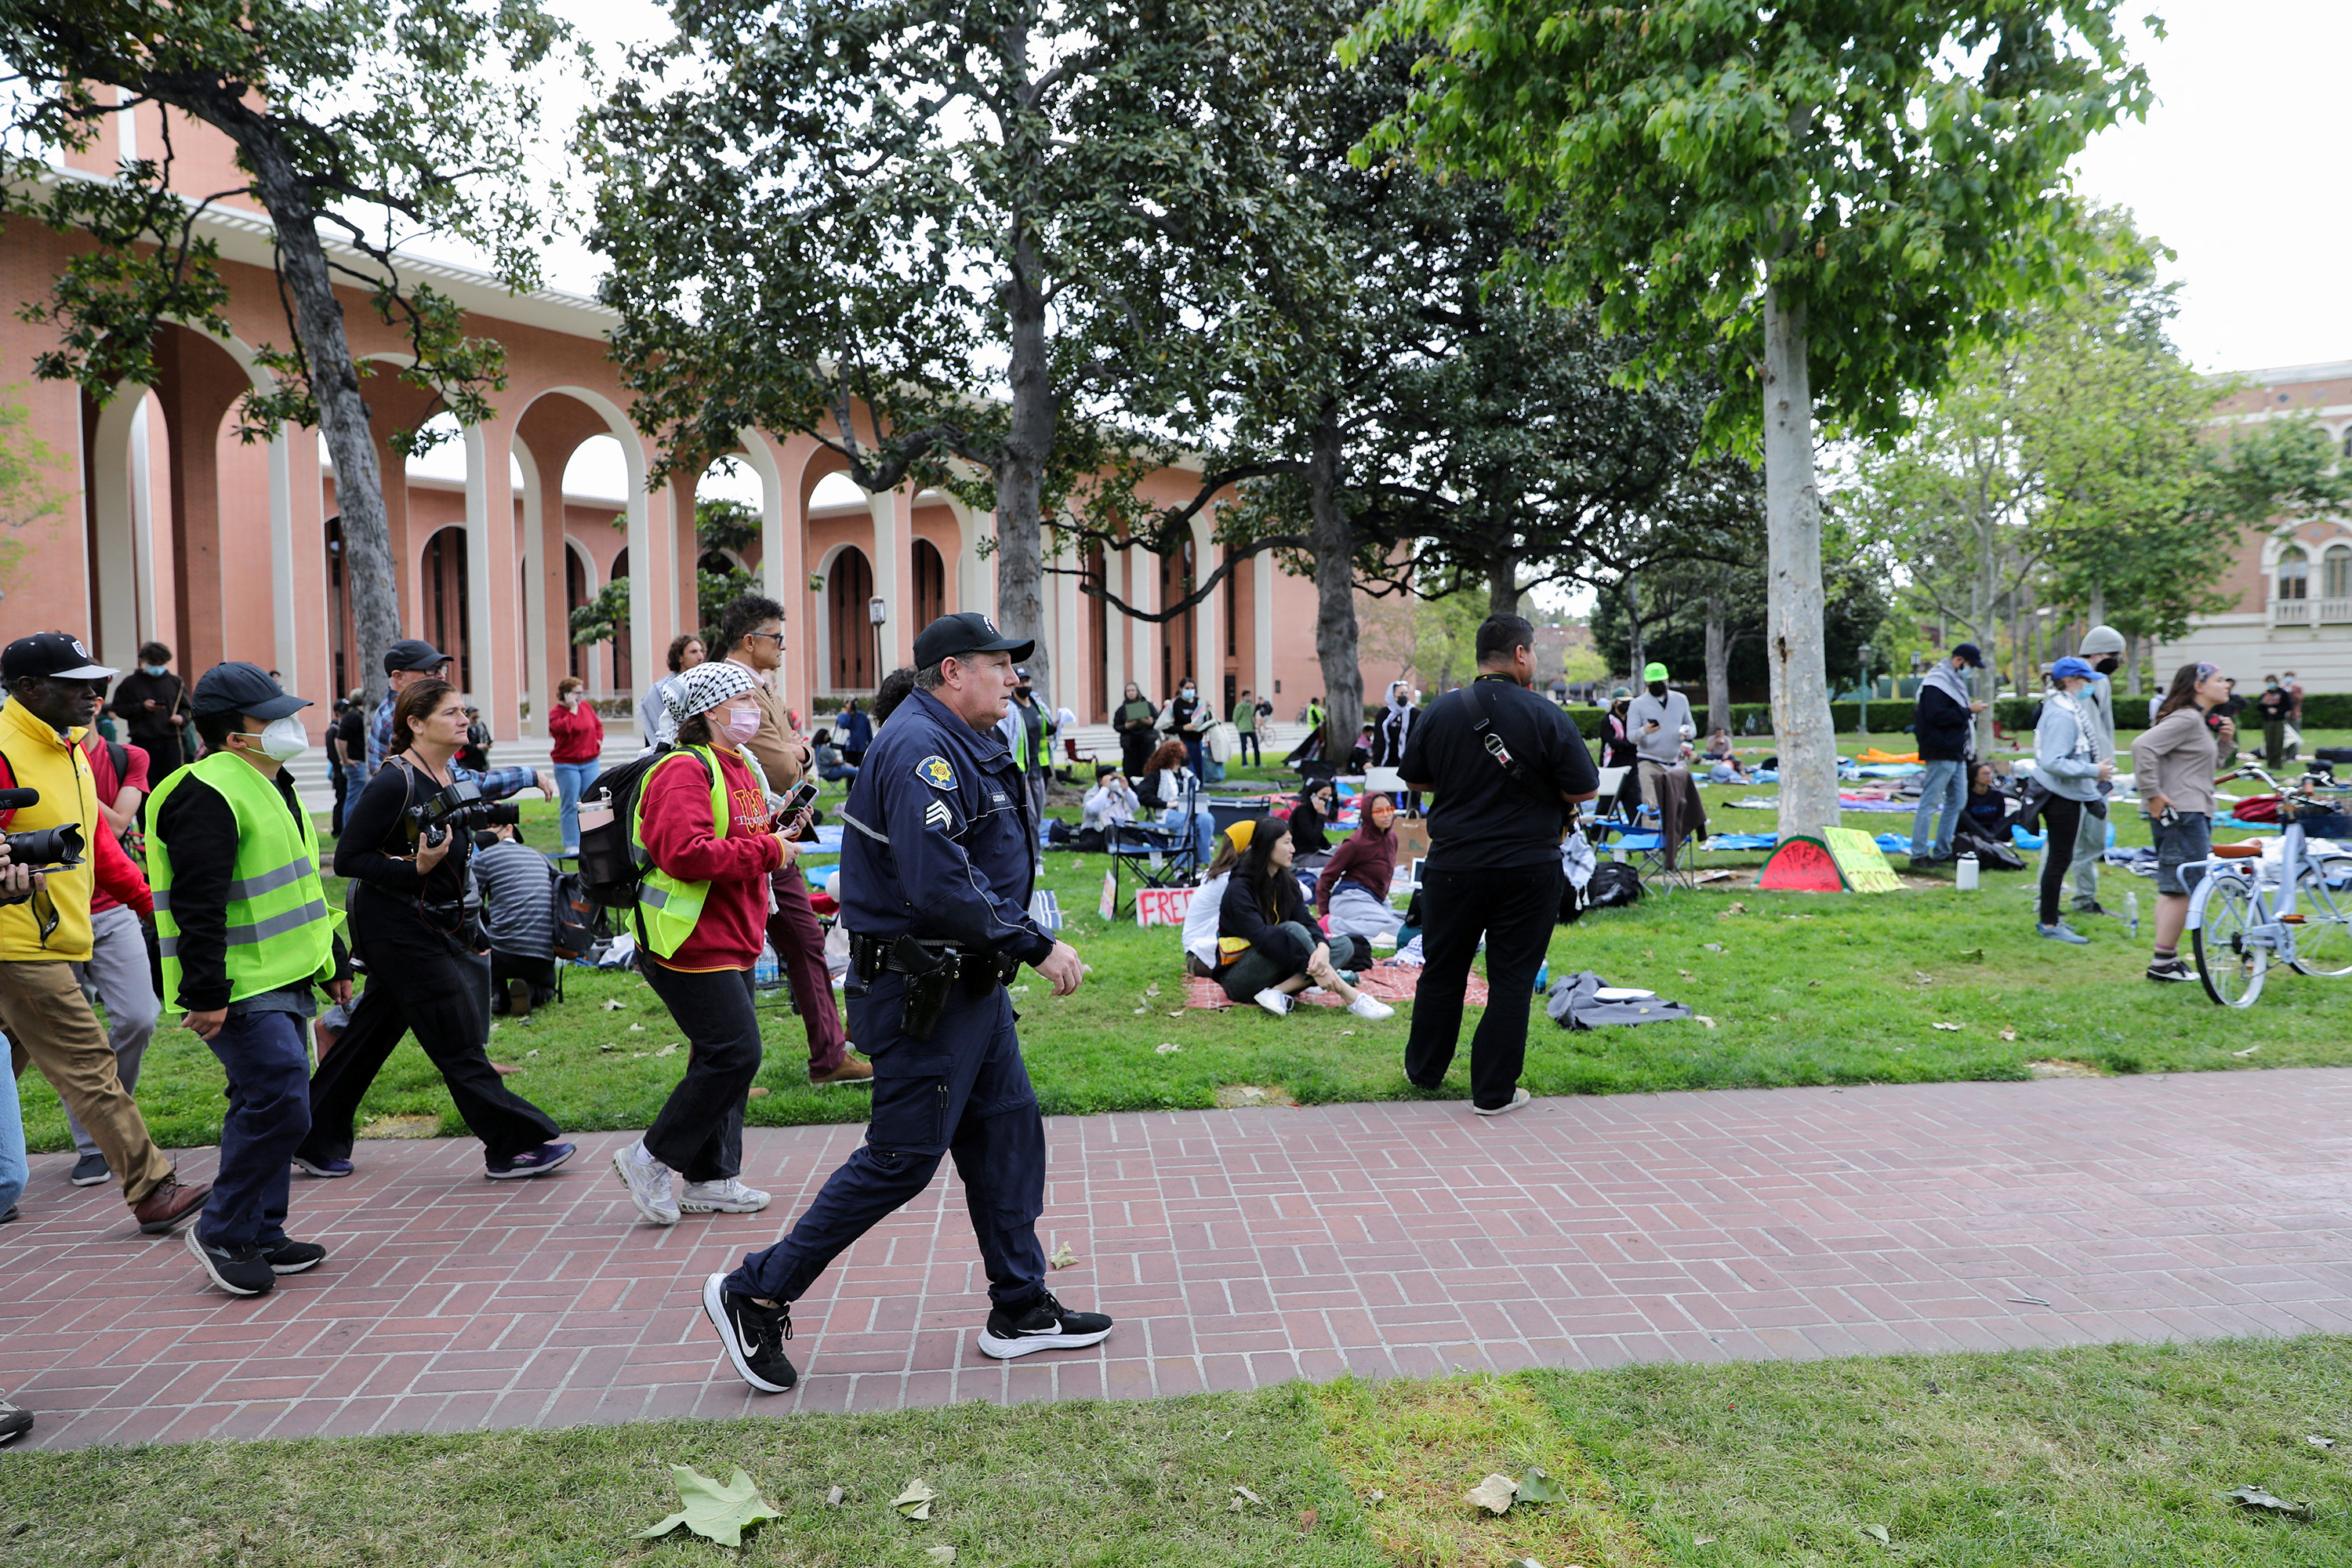 USC Public Safety officer walks to inform students that they must disperse, as they build a protest encampment in support of Palestinians, at the University of Southern California's Alumni Park on April 24, in Los Angeles, California.